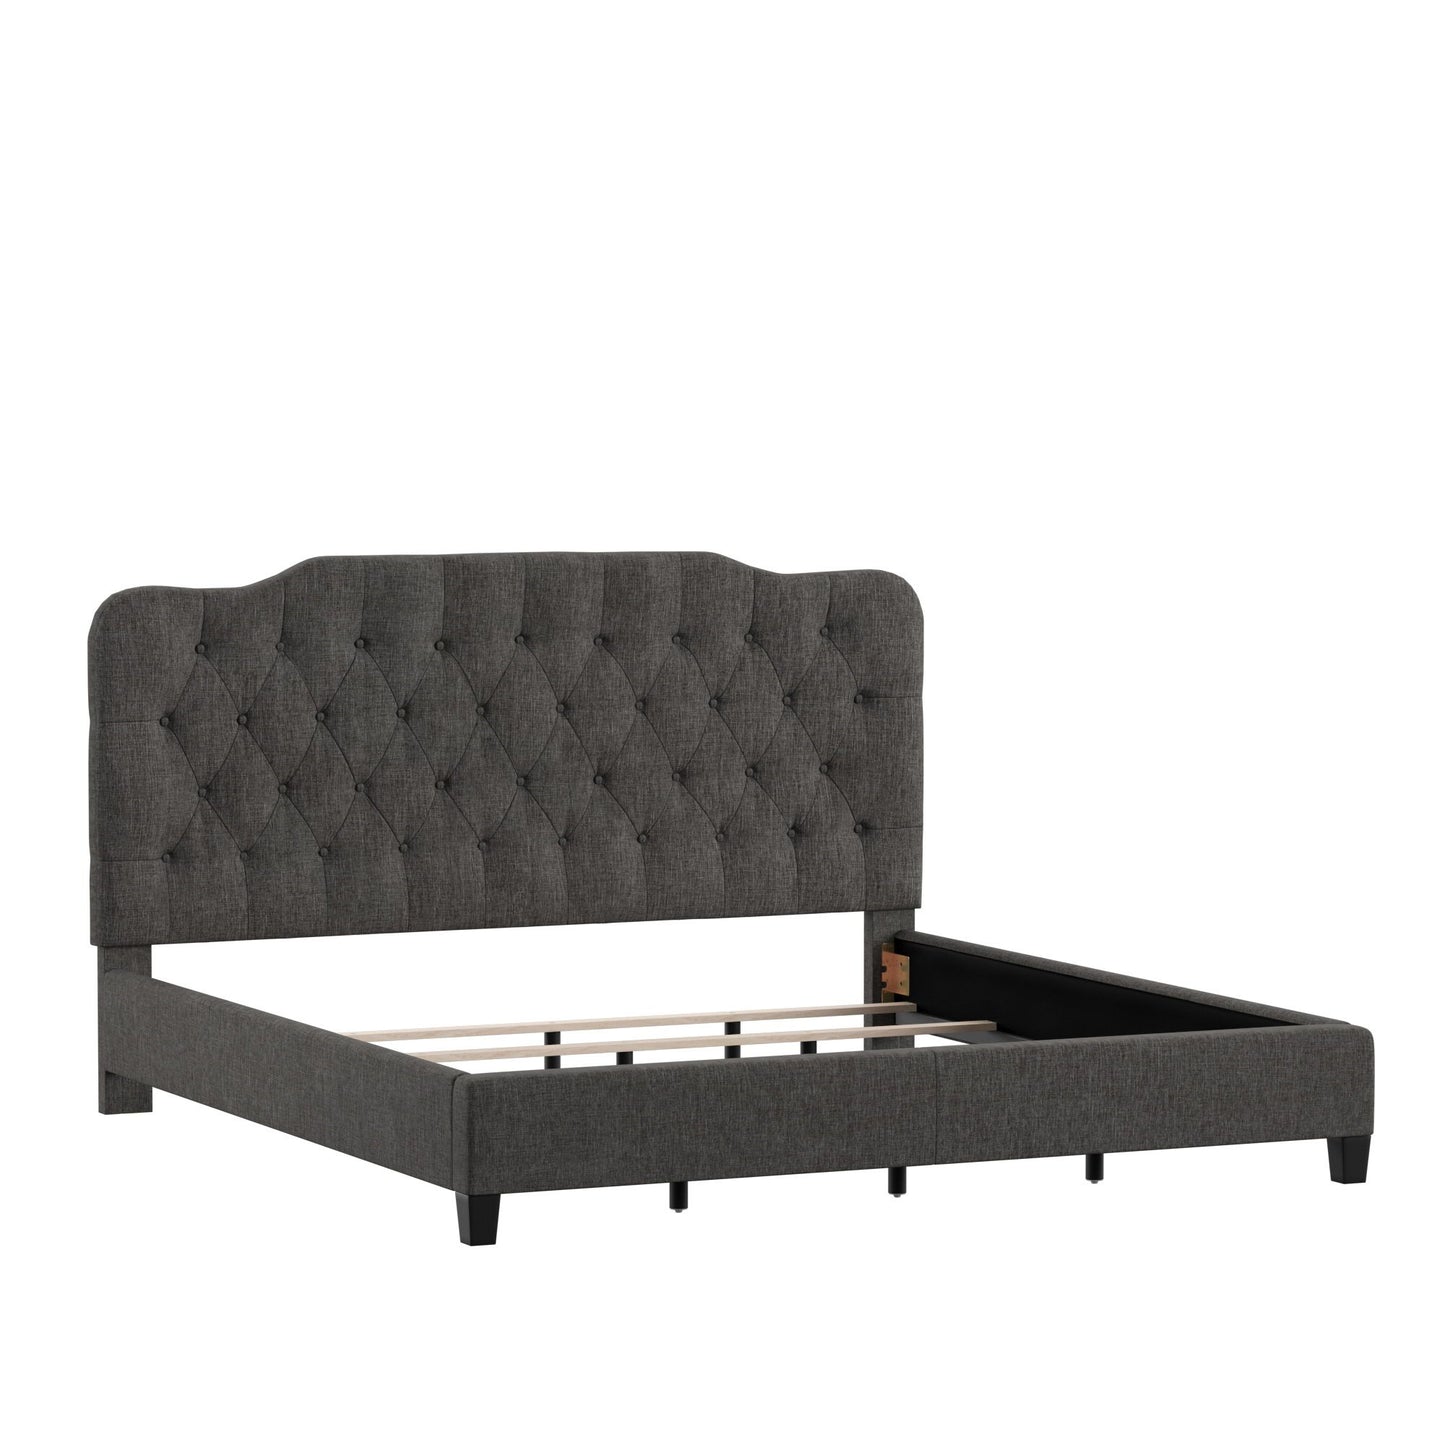 Adjustable Diamond Tufted Camelback Bed - Charcoal, King